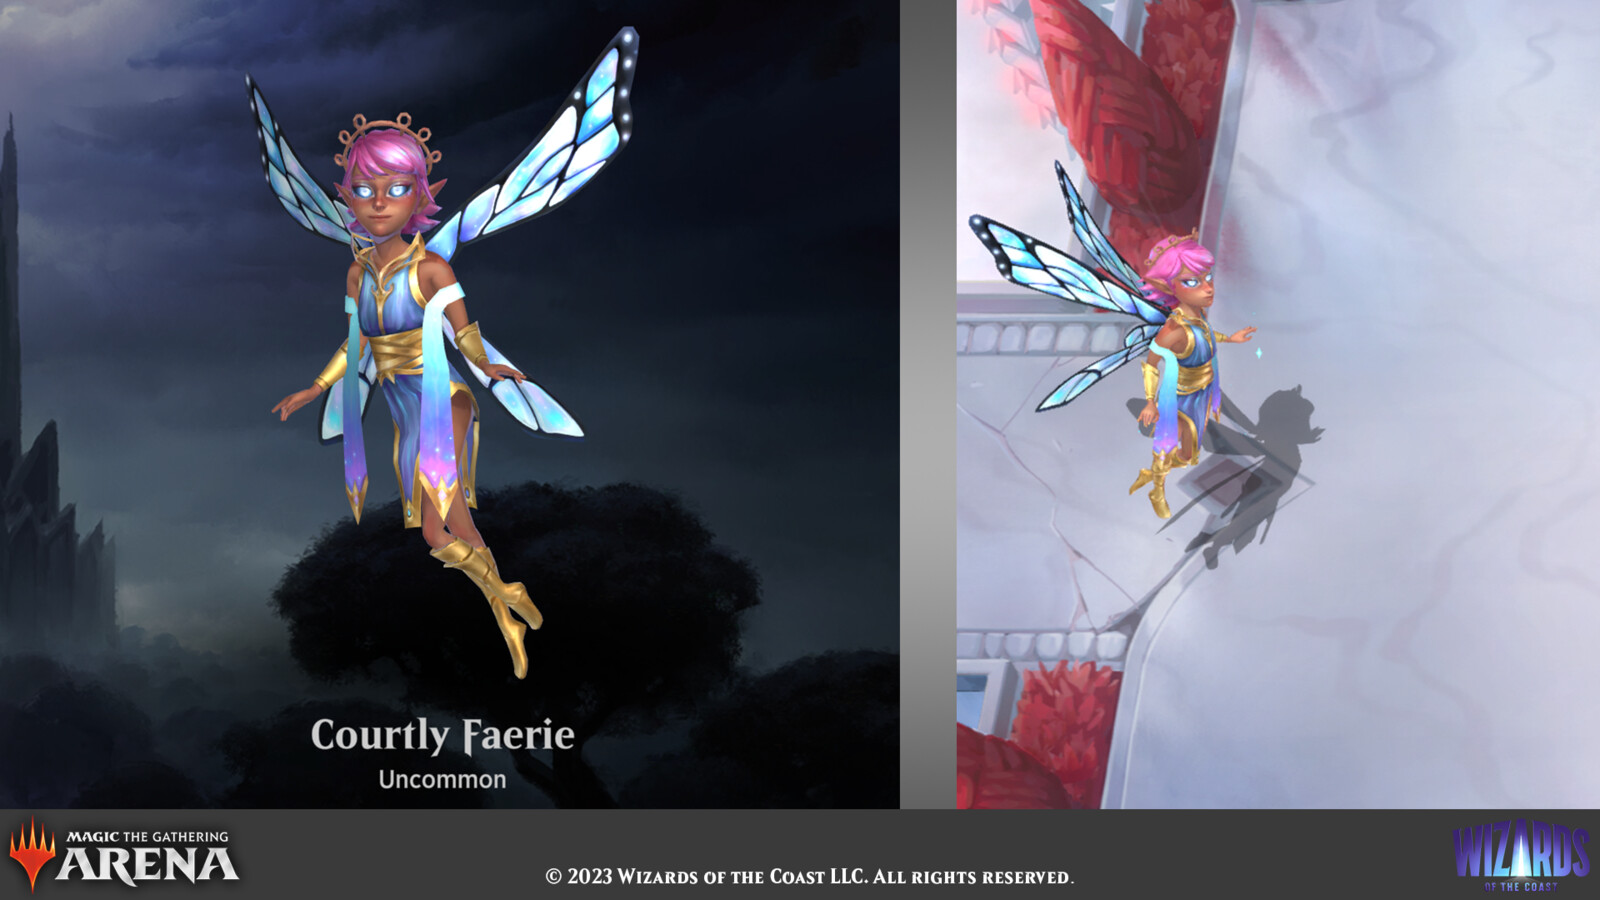 Select companion and game views for the Courtly Faerie